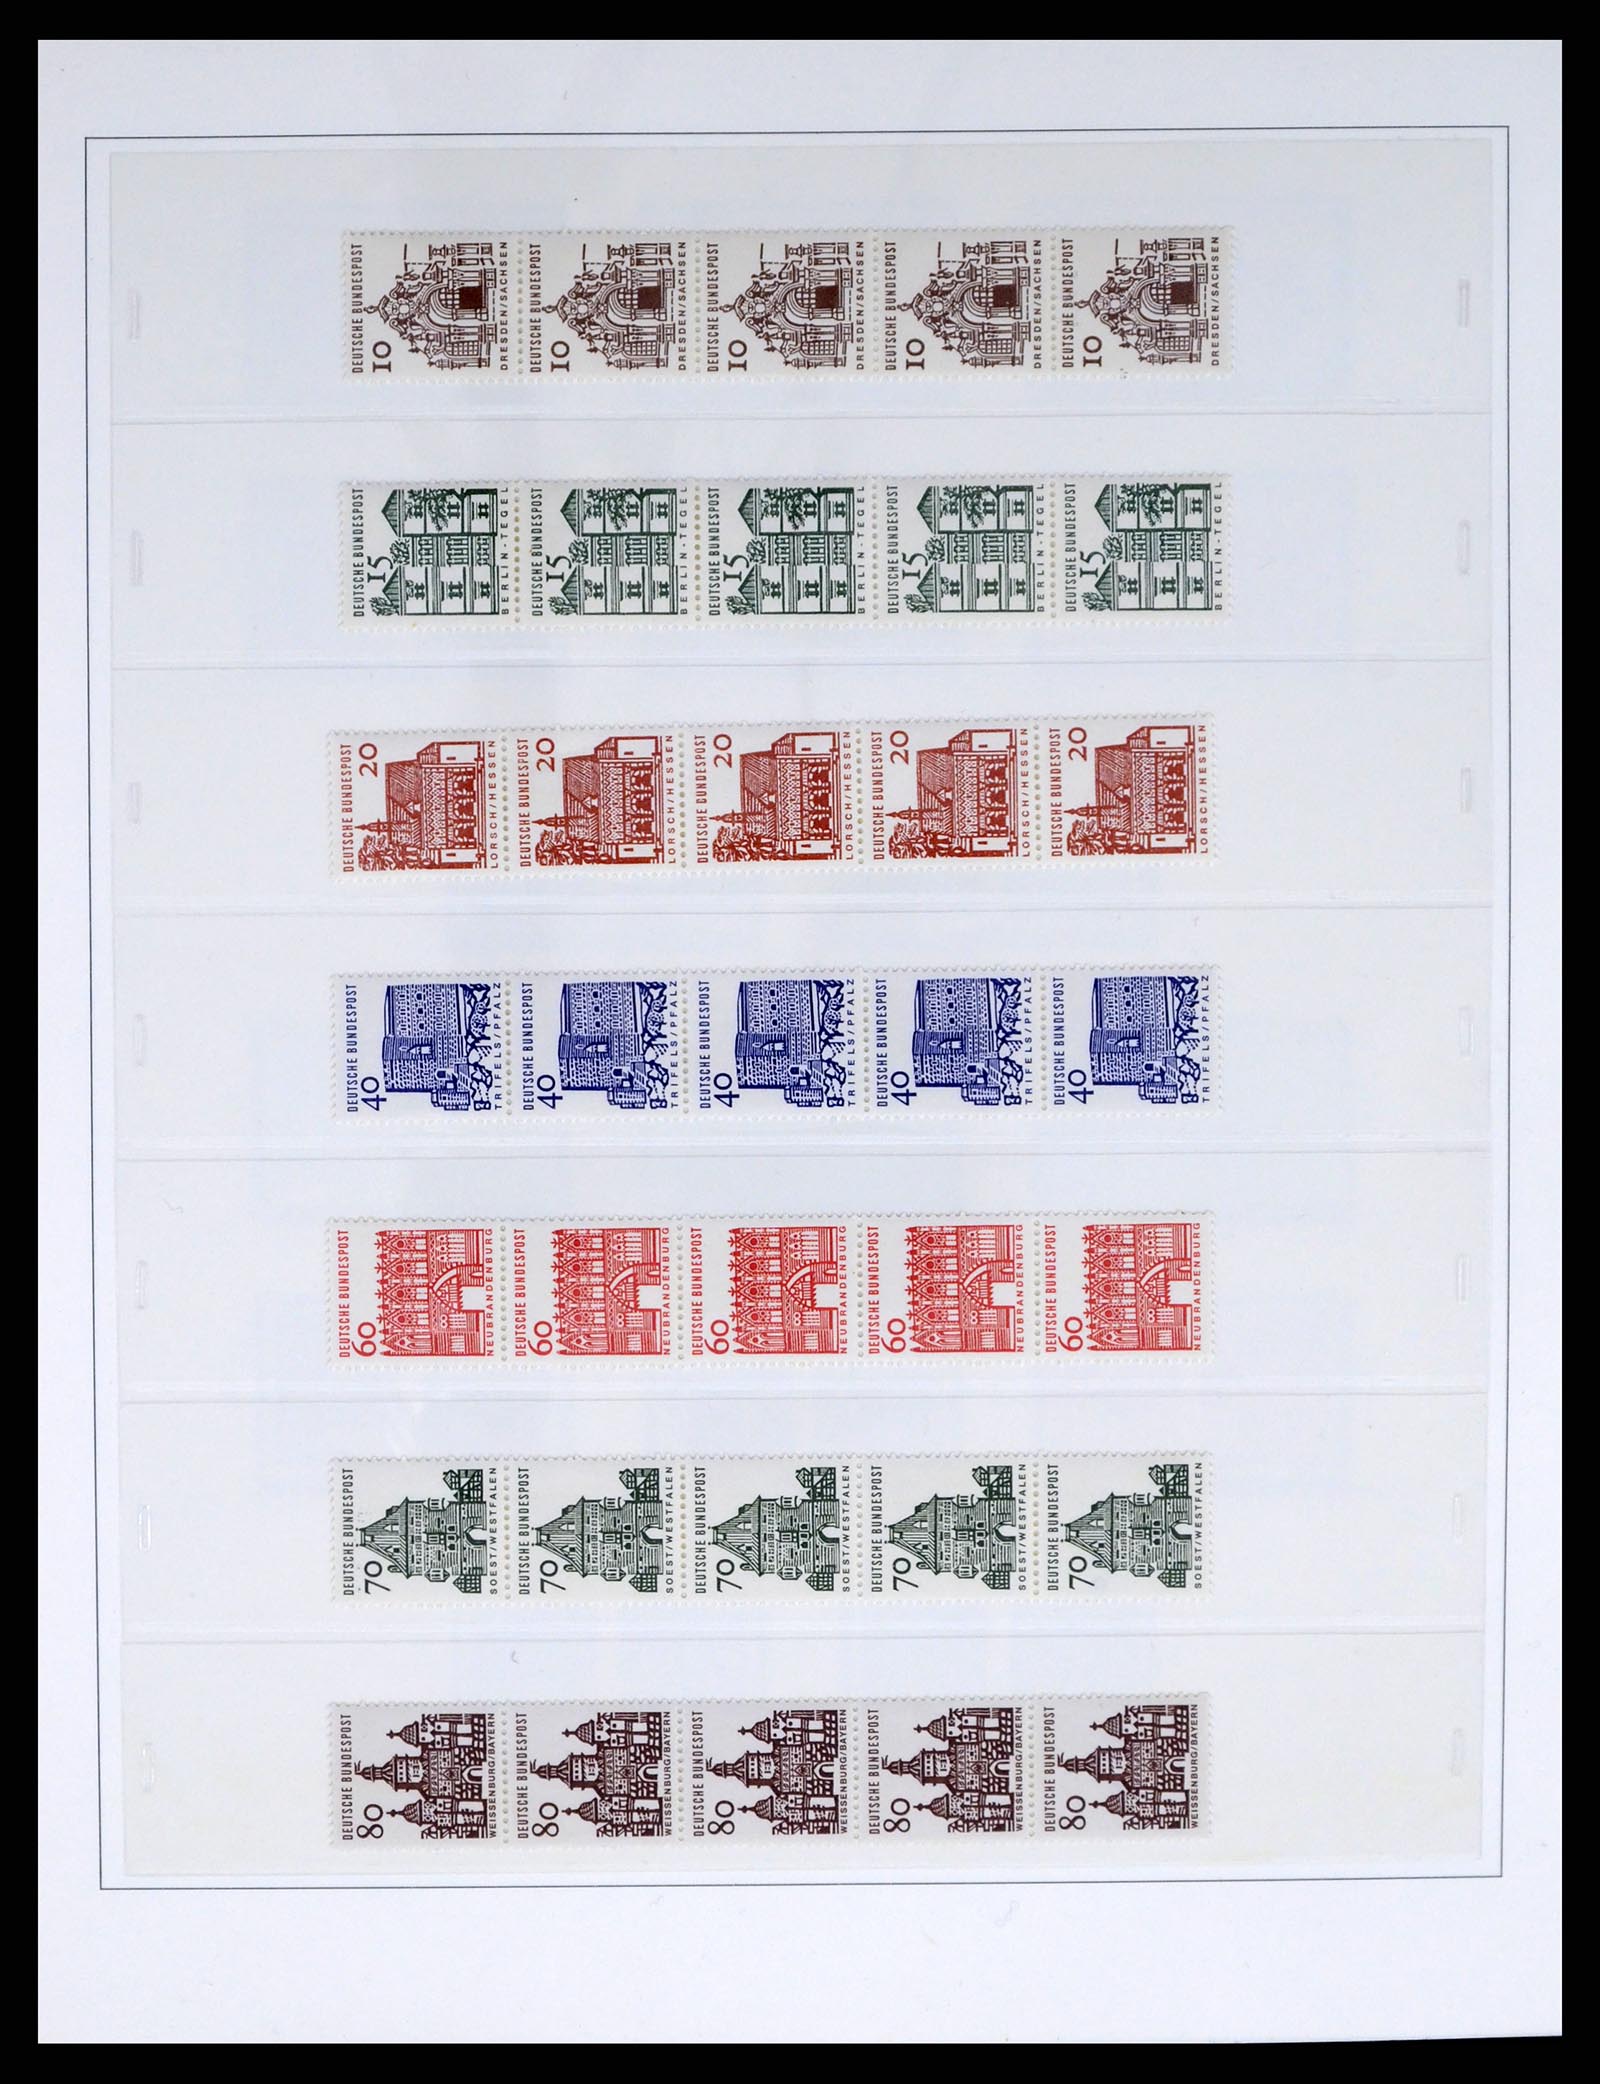 37354 005 - Stamp collection 37354 Bundespost and Berlin 1955-2000.